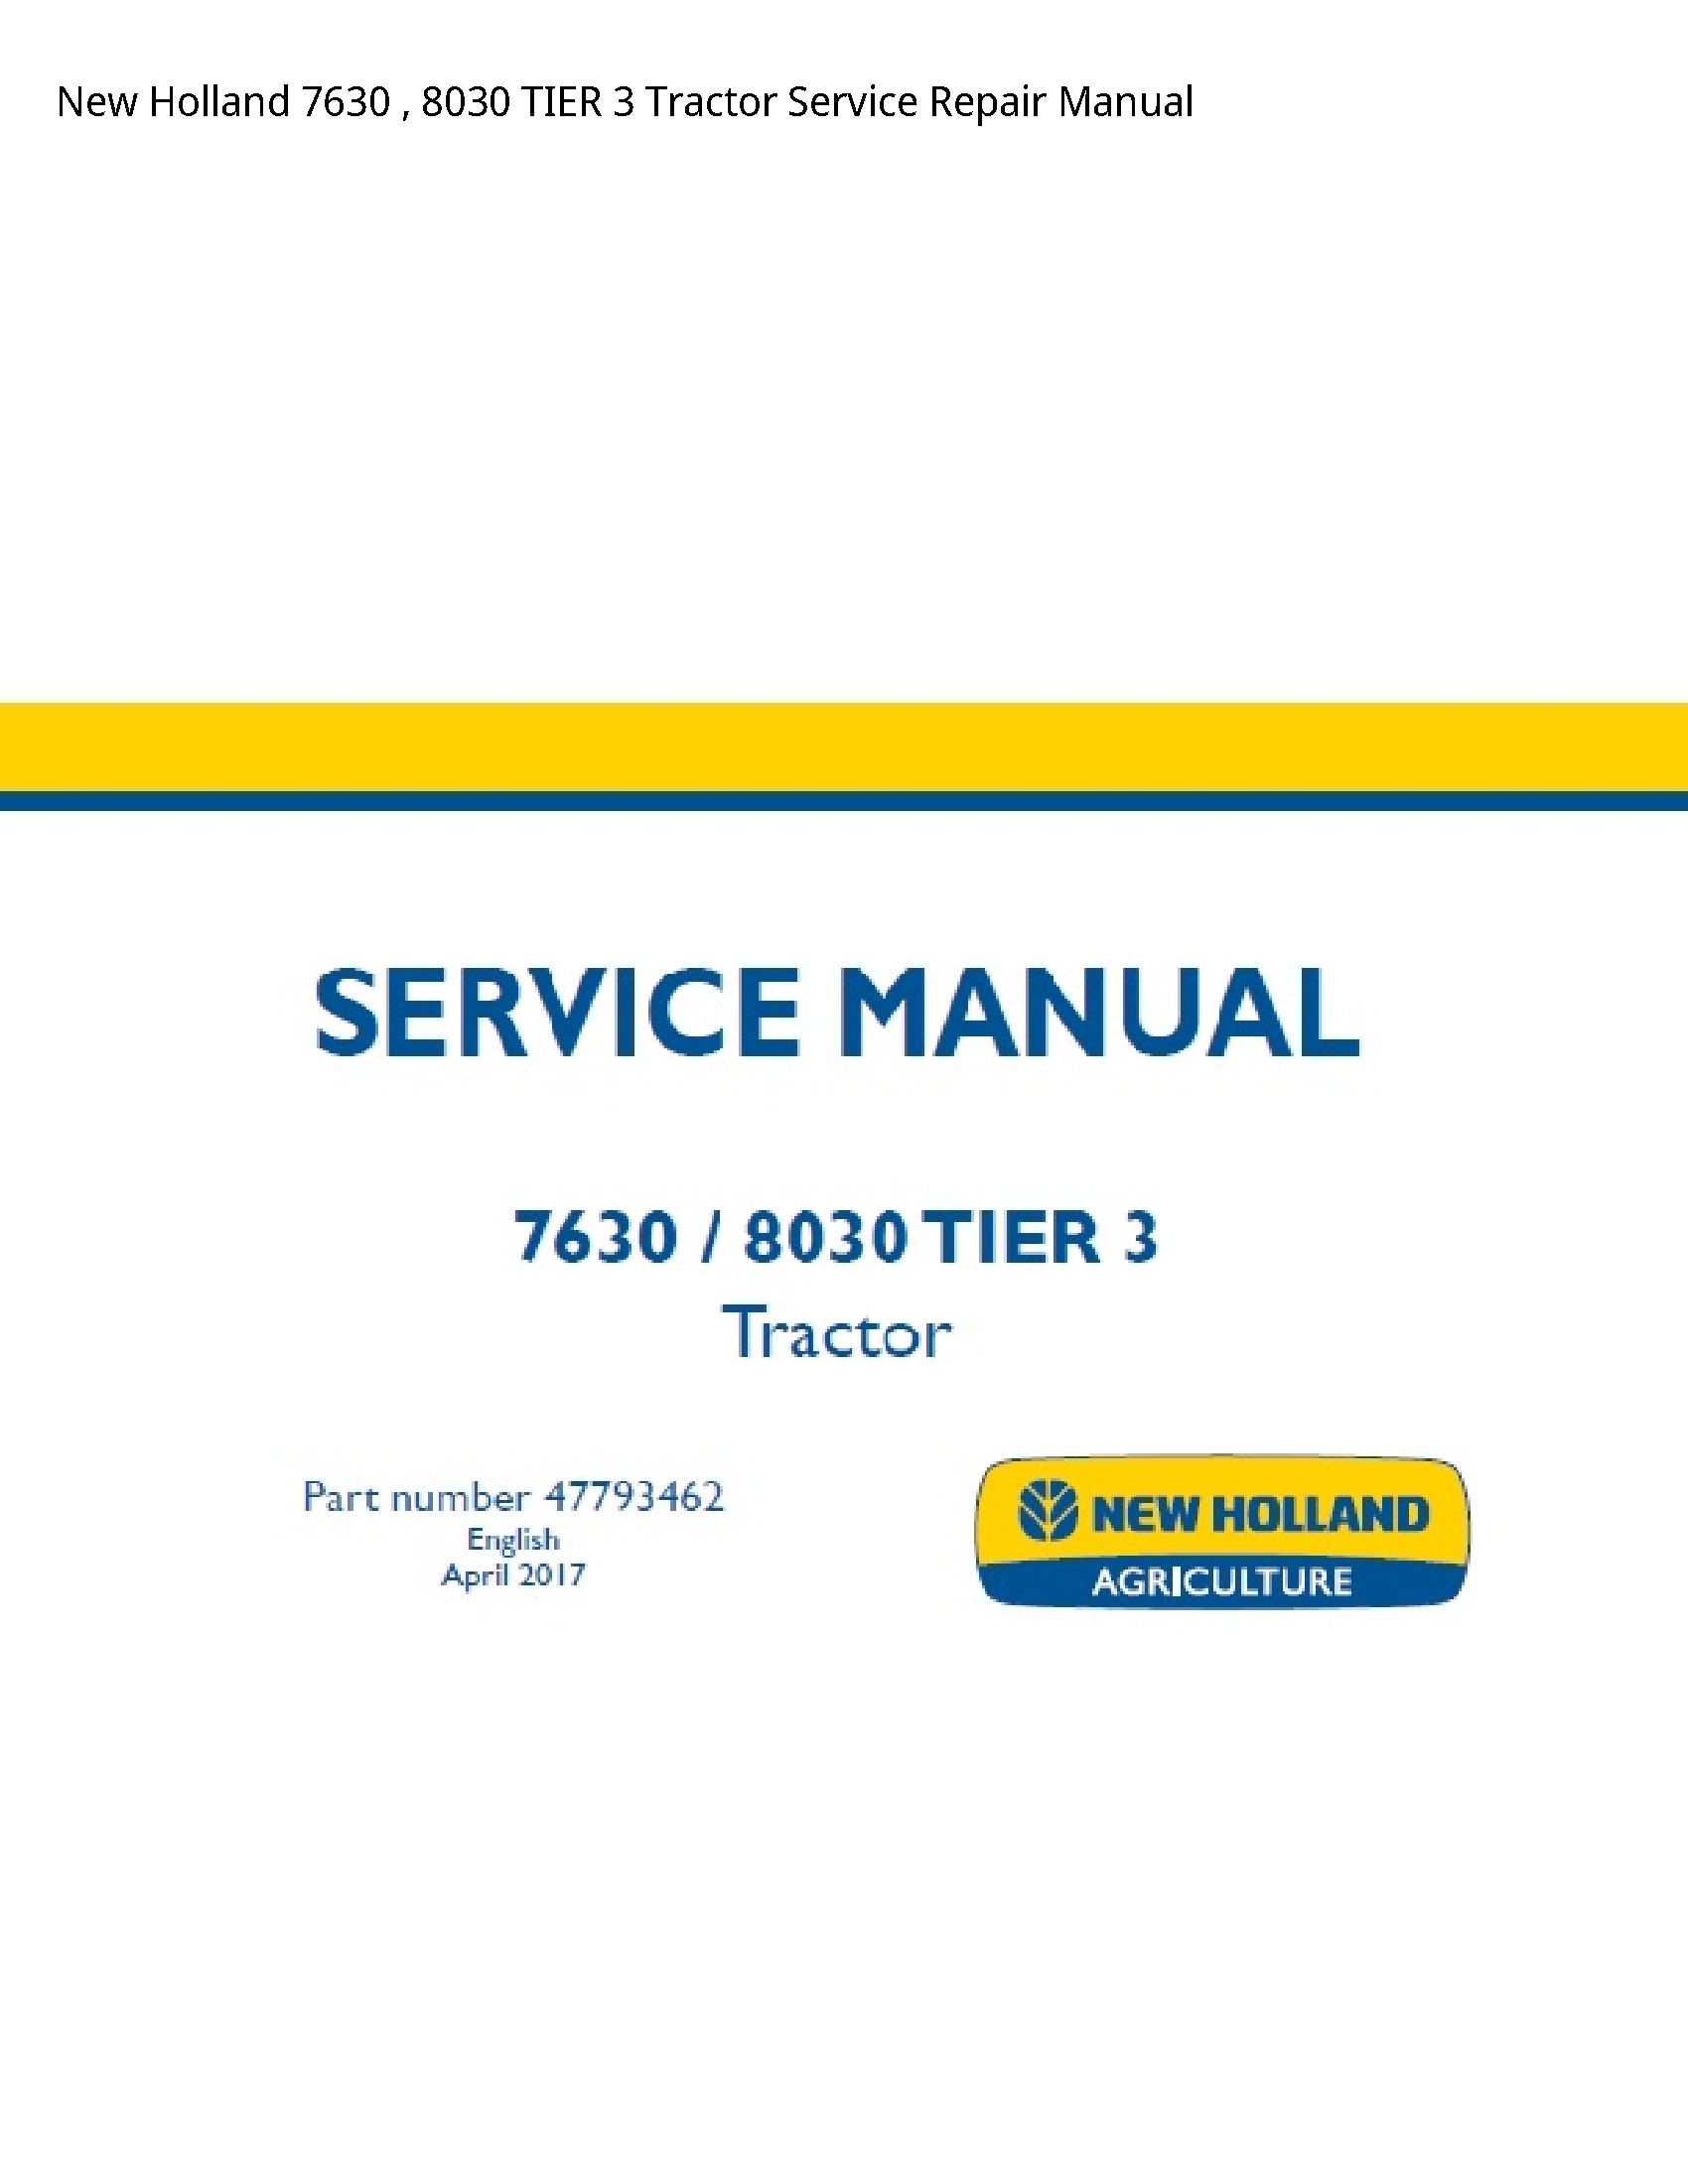 New Holland 7630 TIER Tractor manual